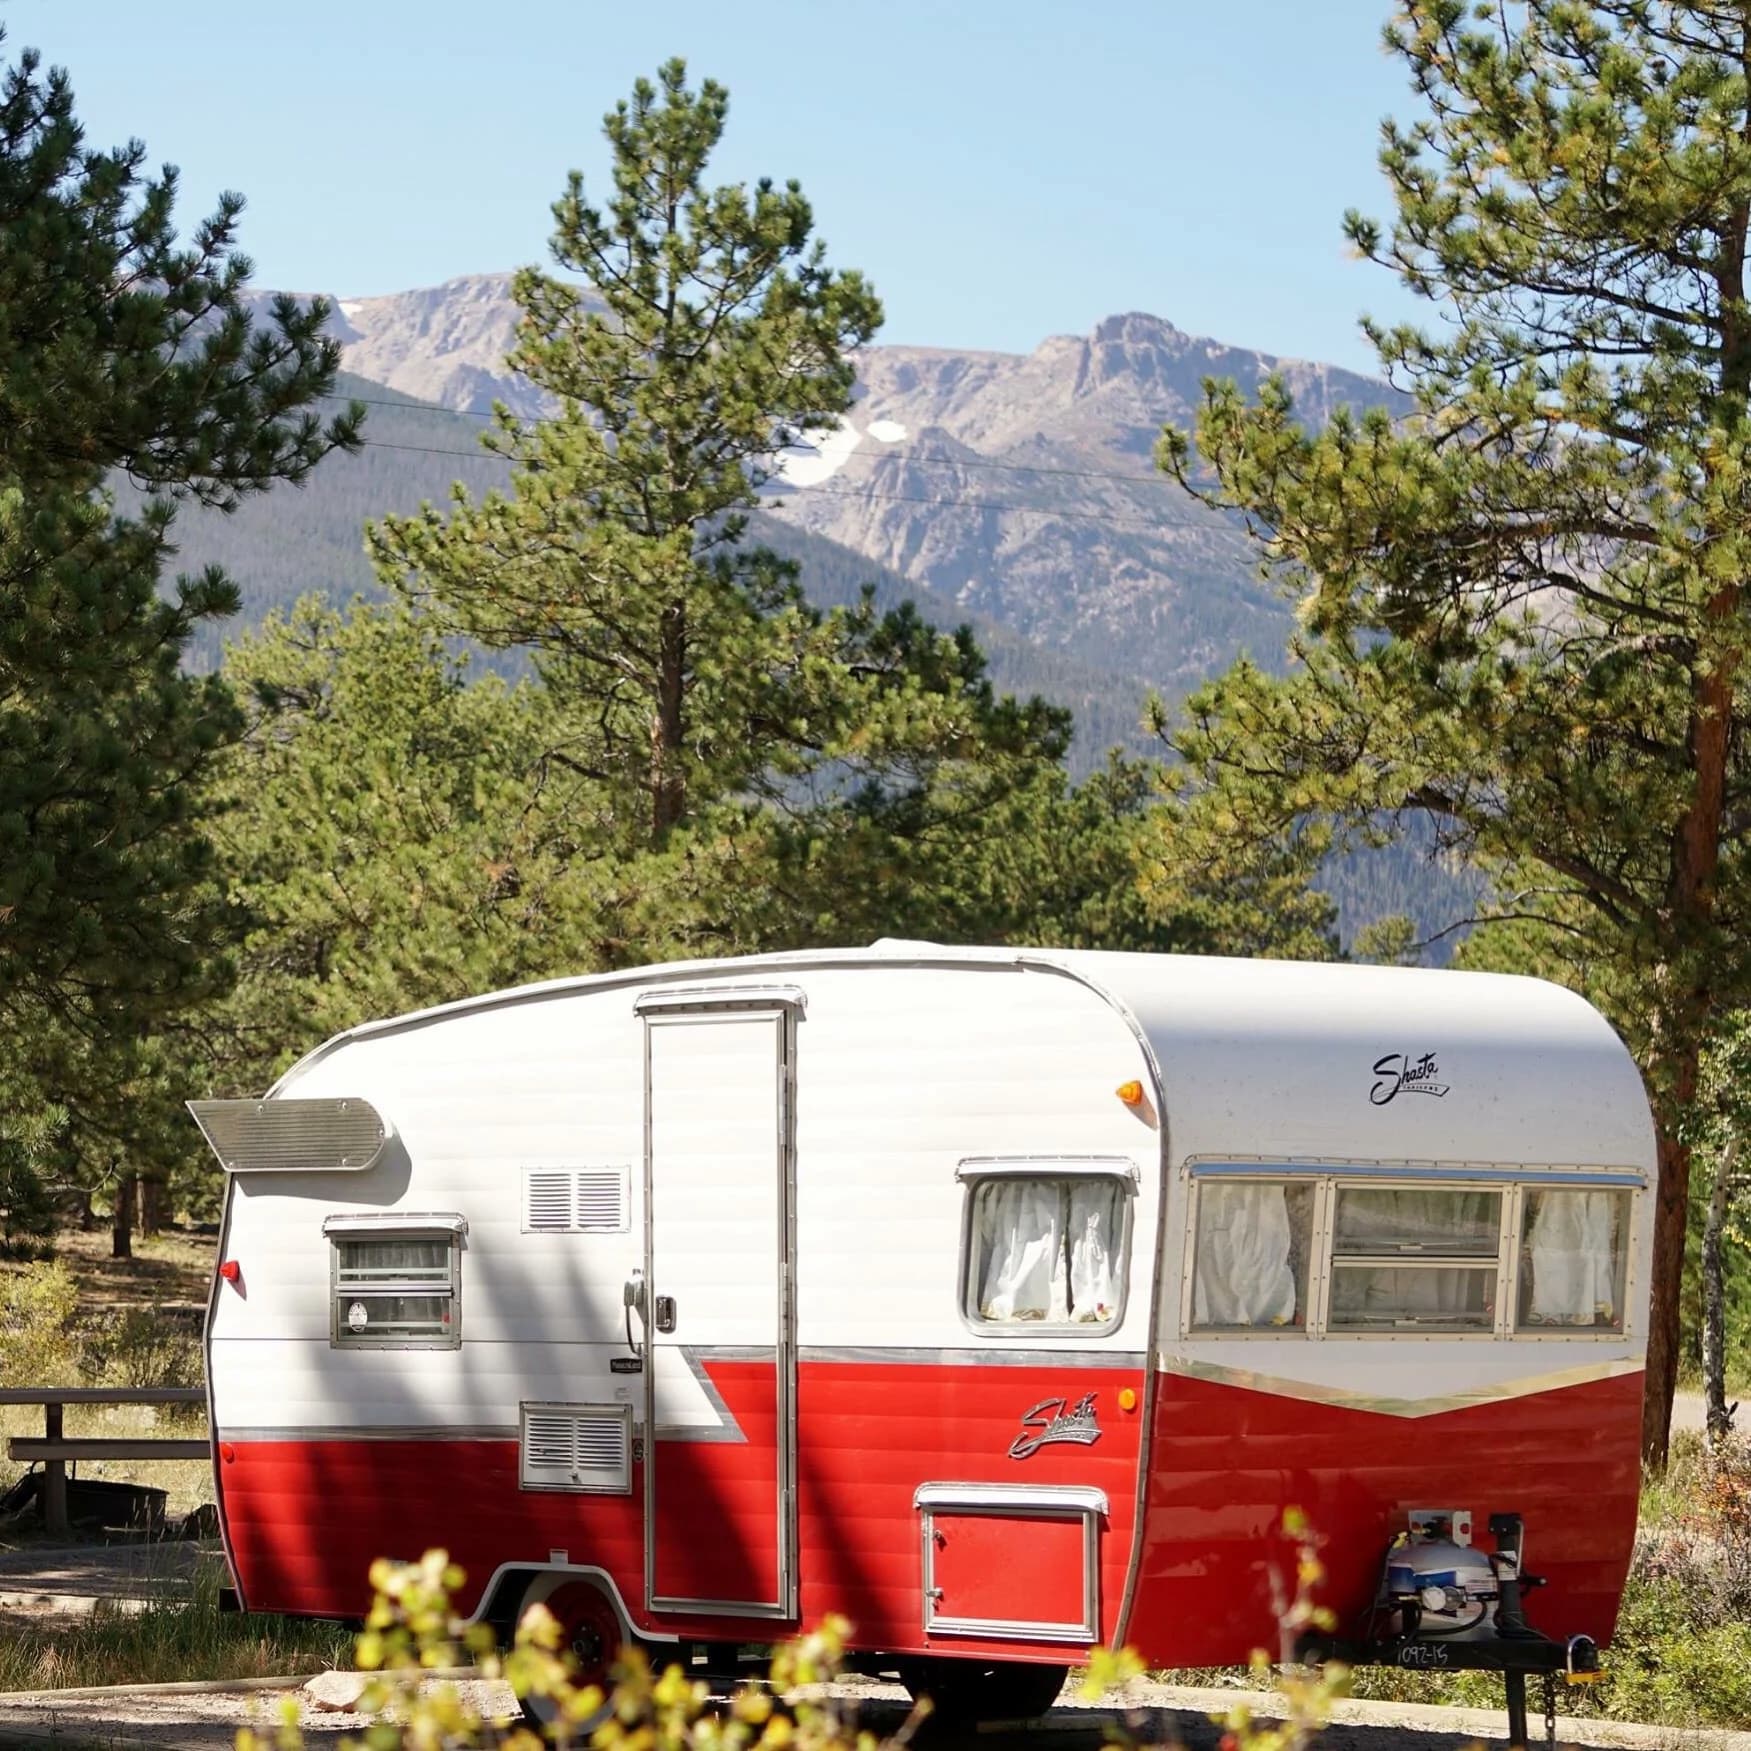 Vintage red and white trailer parked beside pine trees below mountains.